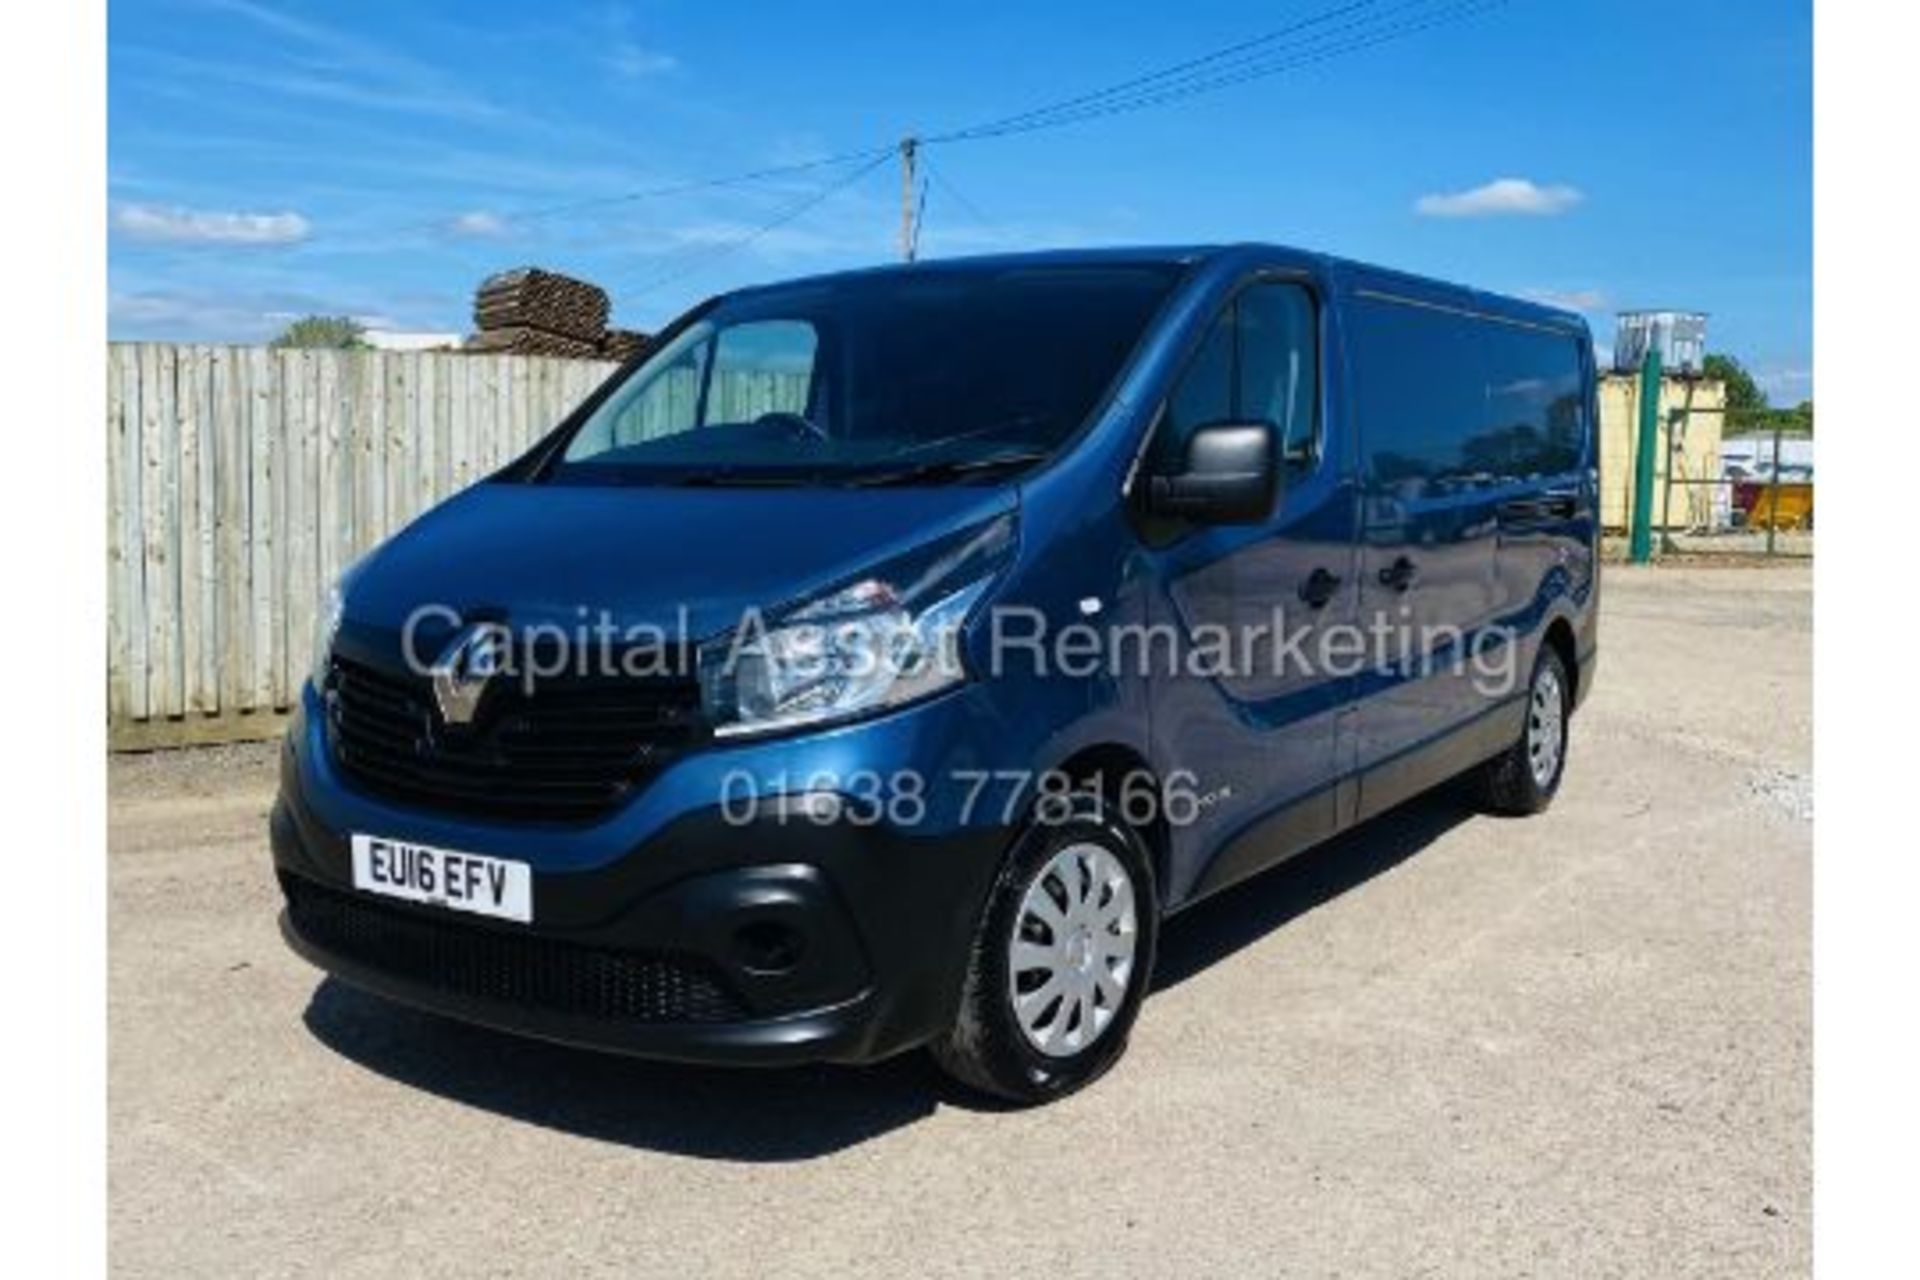 (ON SALE) RENAULT TRAFIC 1.6DCI "BUSINESS EDITION" LWB - 16 REG - AIR CON - MET PAINT - ELEC PACK - Image 2 of 21